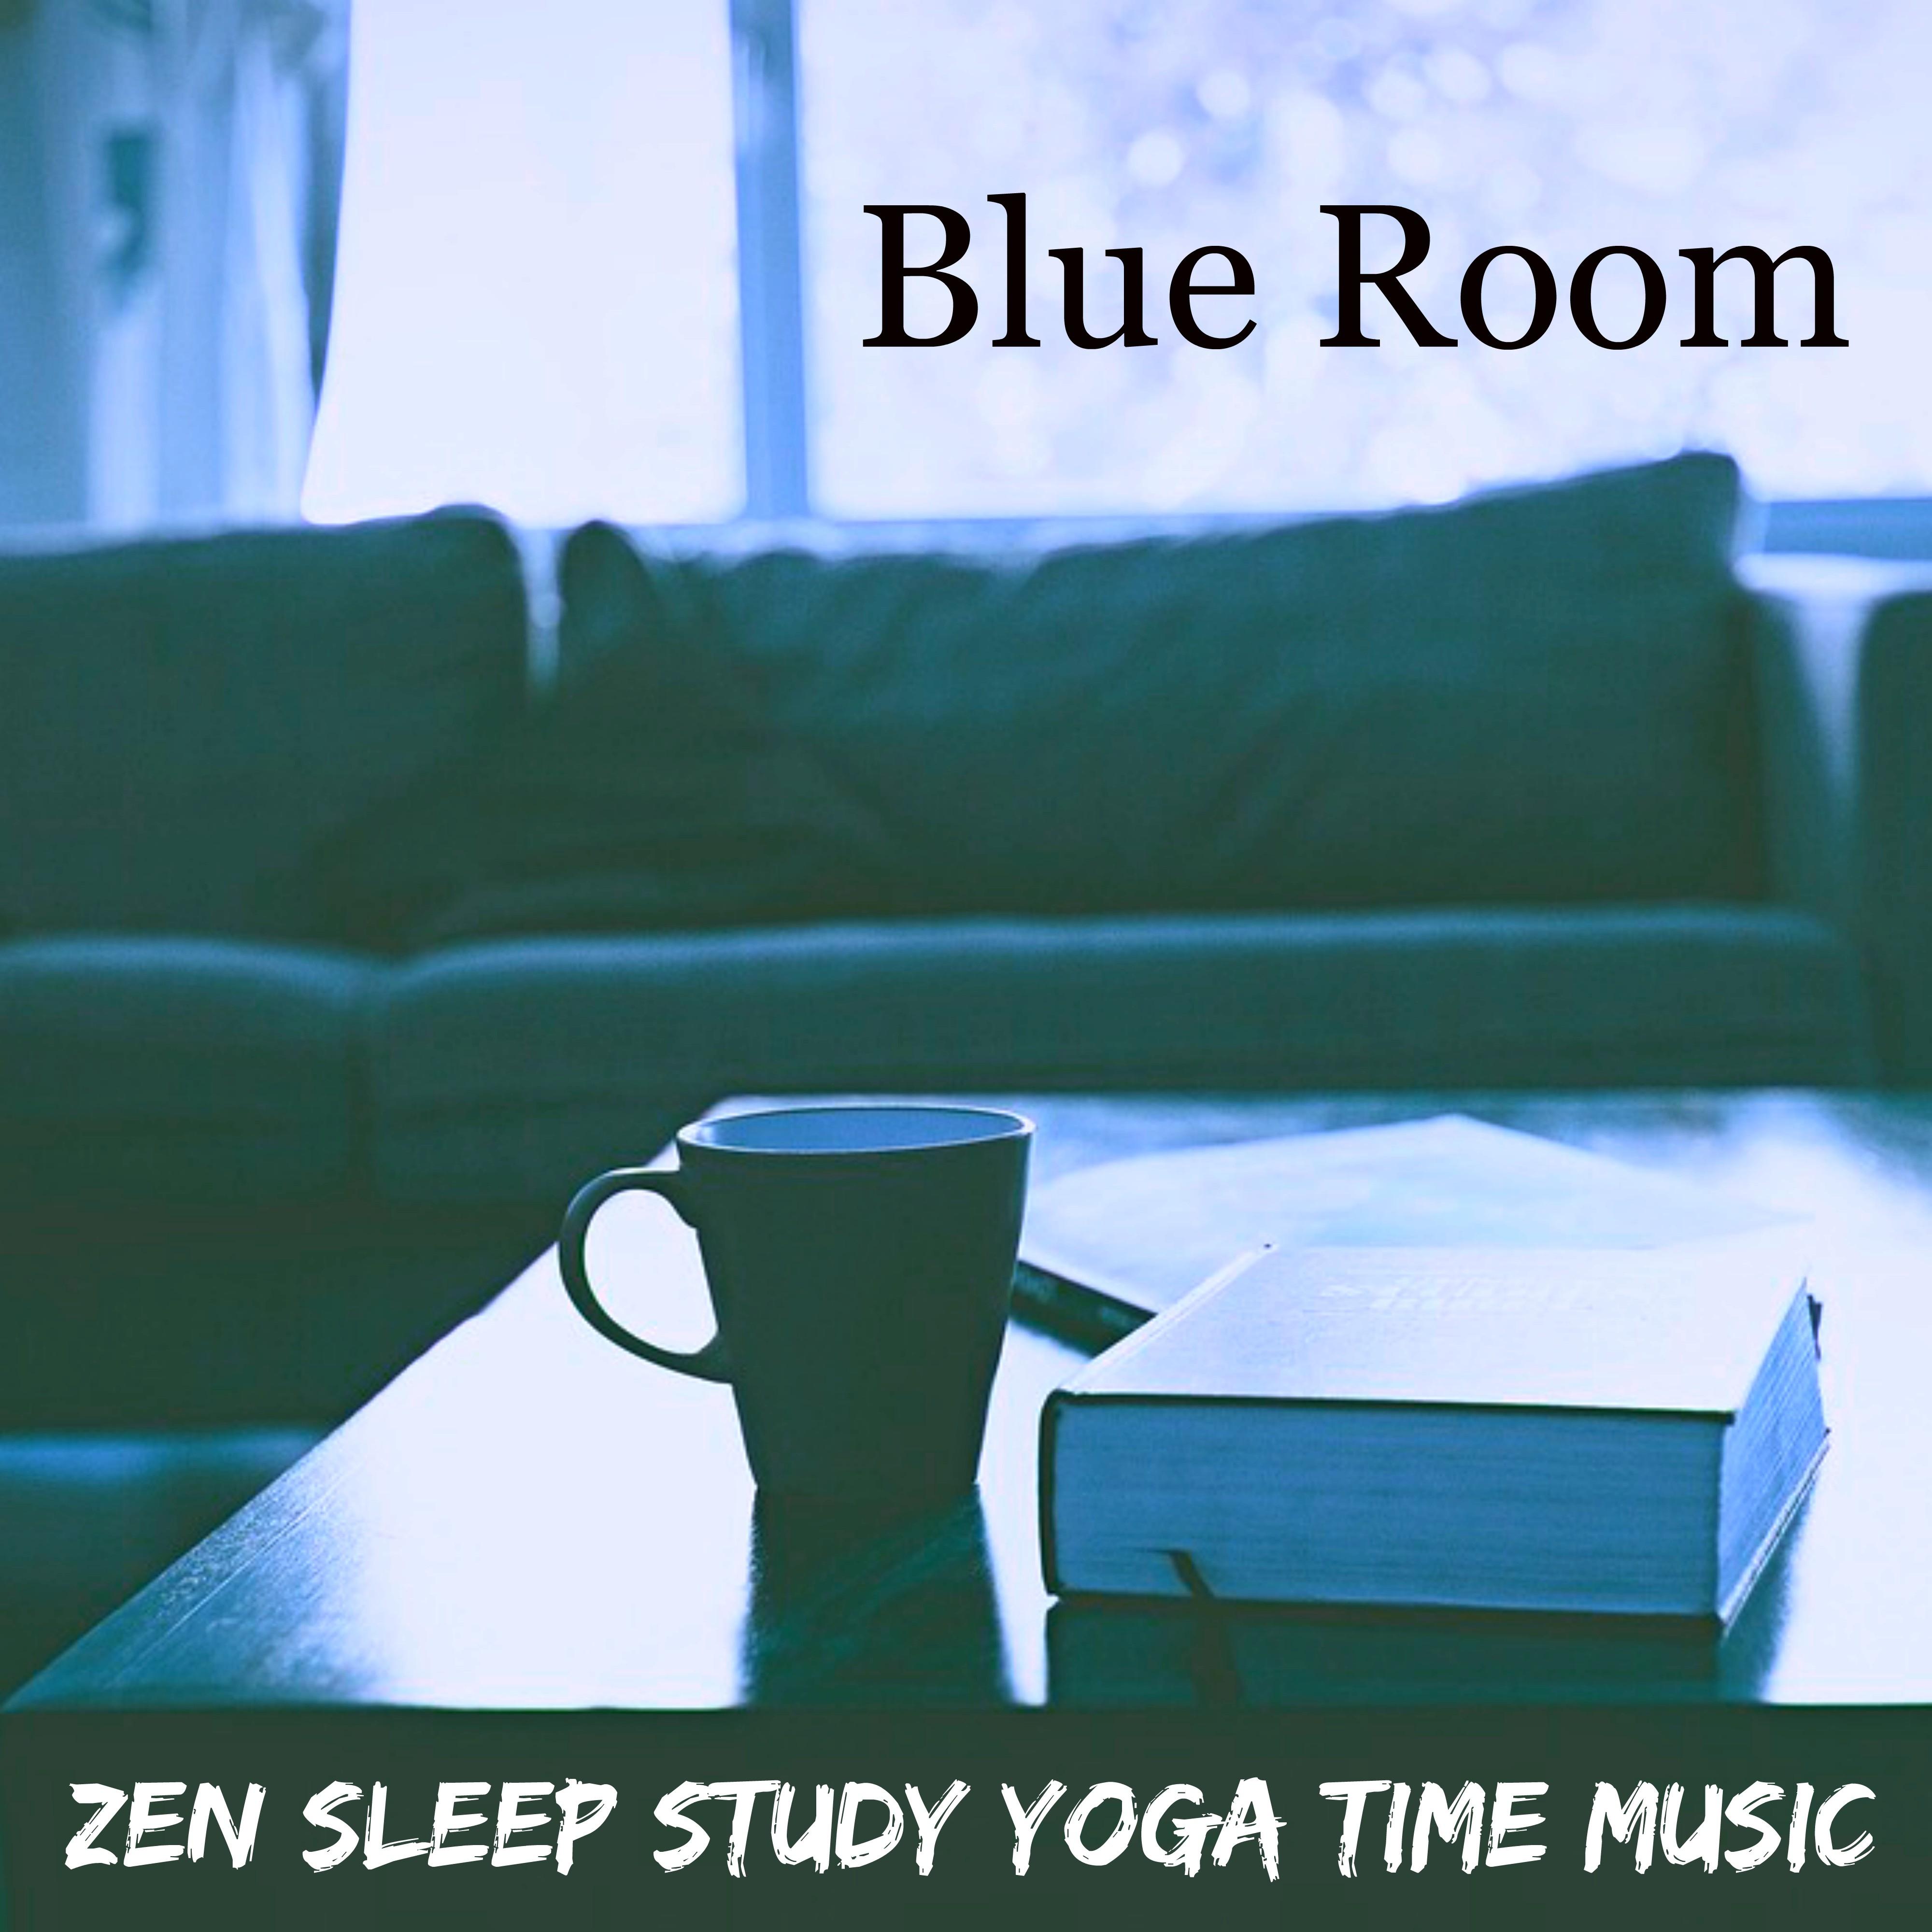 Blue Room - Zen Sleep Study Yoga Time Music for Chakras Meditation Massage Therapy Pranic Energy with Nature Instrumental Relaxing Sounds